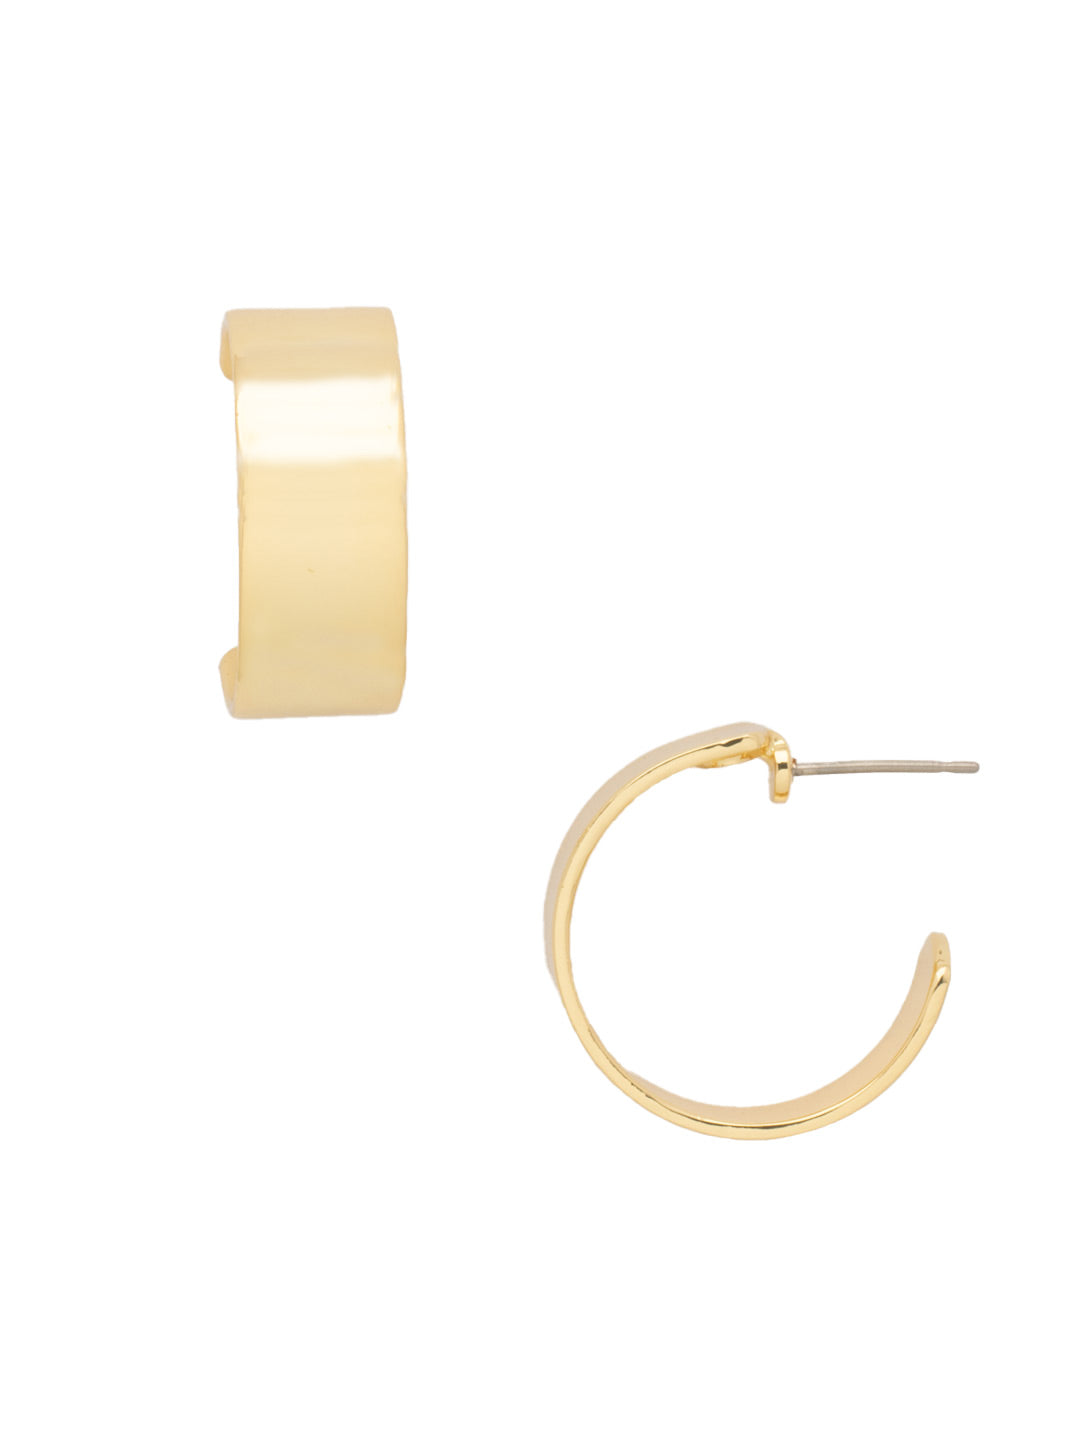 Wide Domed Hoop Earrings - EFM20BGMTL - <p>The Wide Domed Hoop Earrings feature a classic metal flat domed hoop on a post From Sorrelli's Bare Metallic collection in our Bright Gold-tone finish.</p>